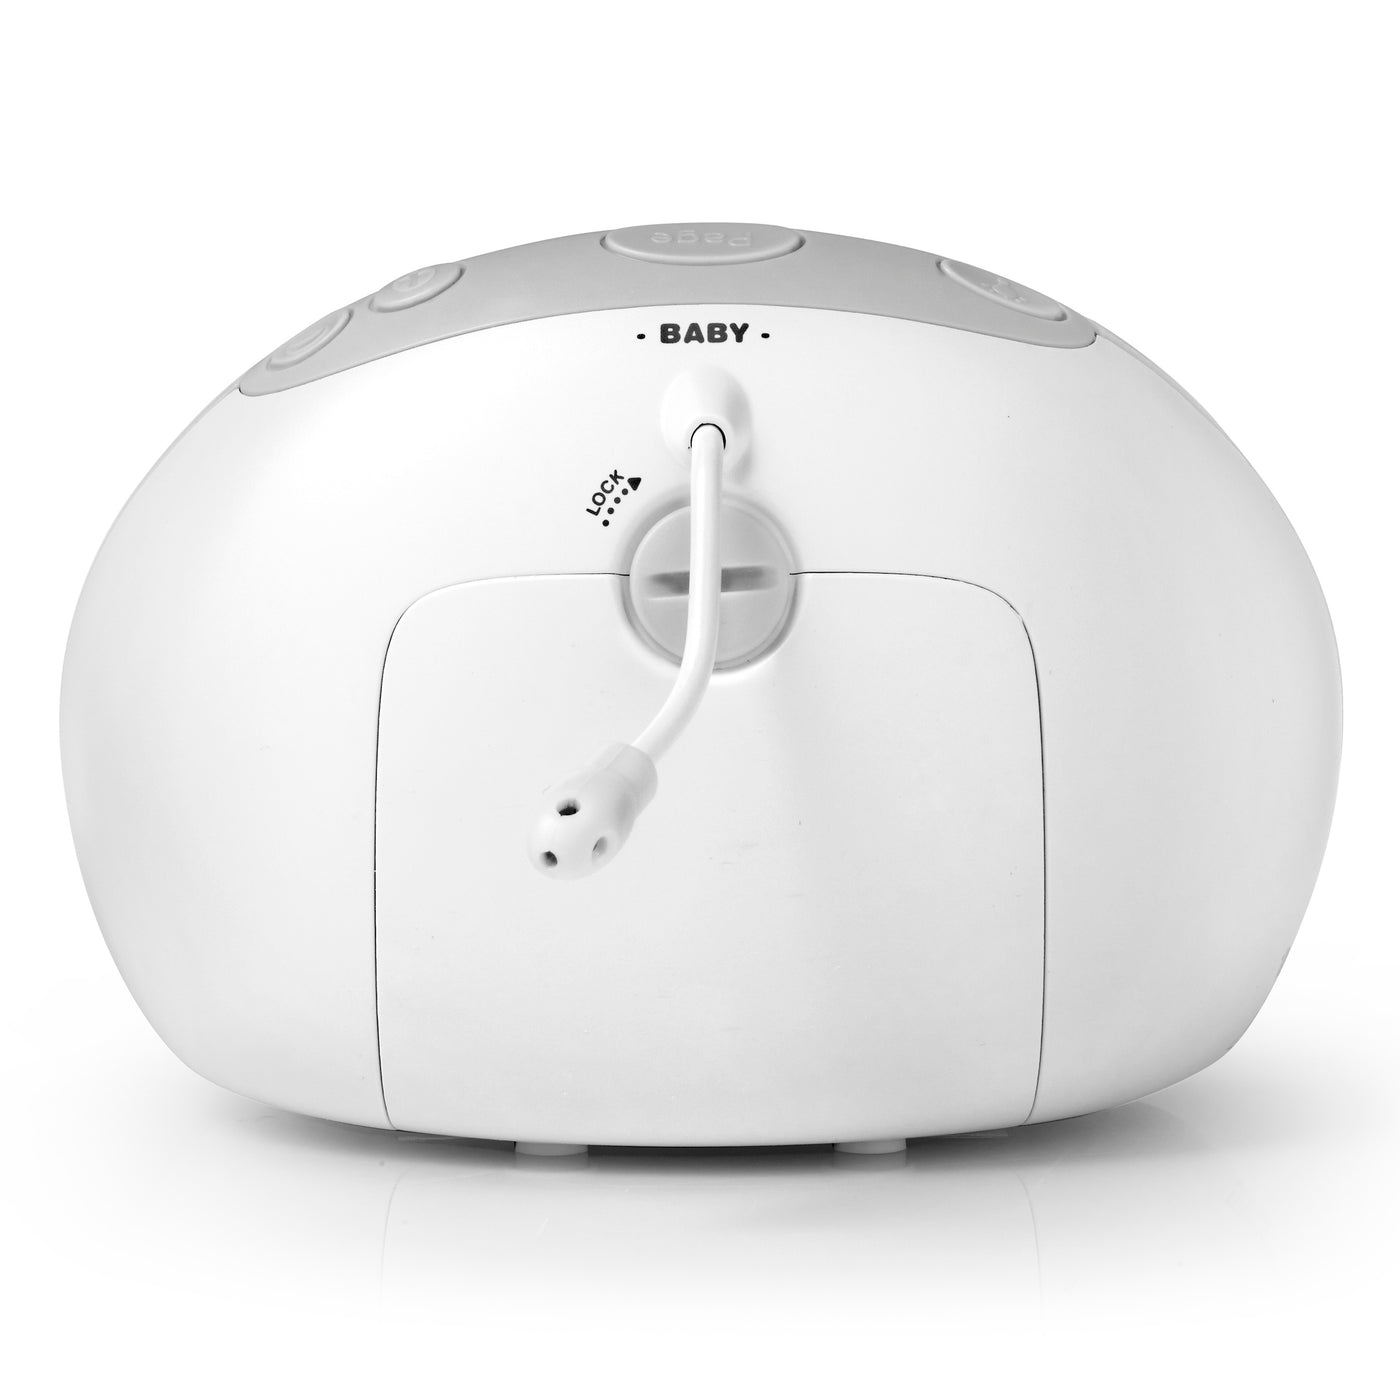 Alecto DBX-88GS - Full Eco DECT baby monitor with display, white/gray